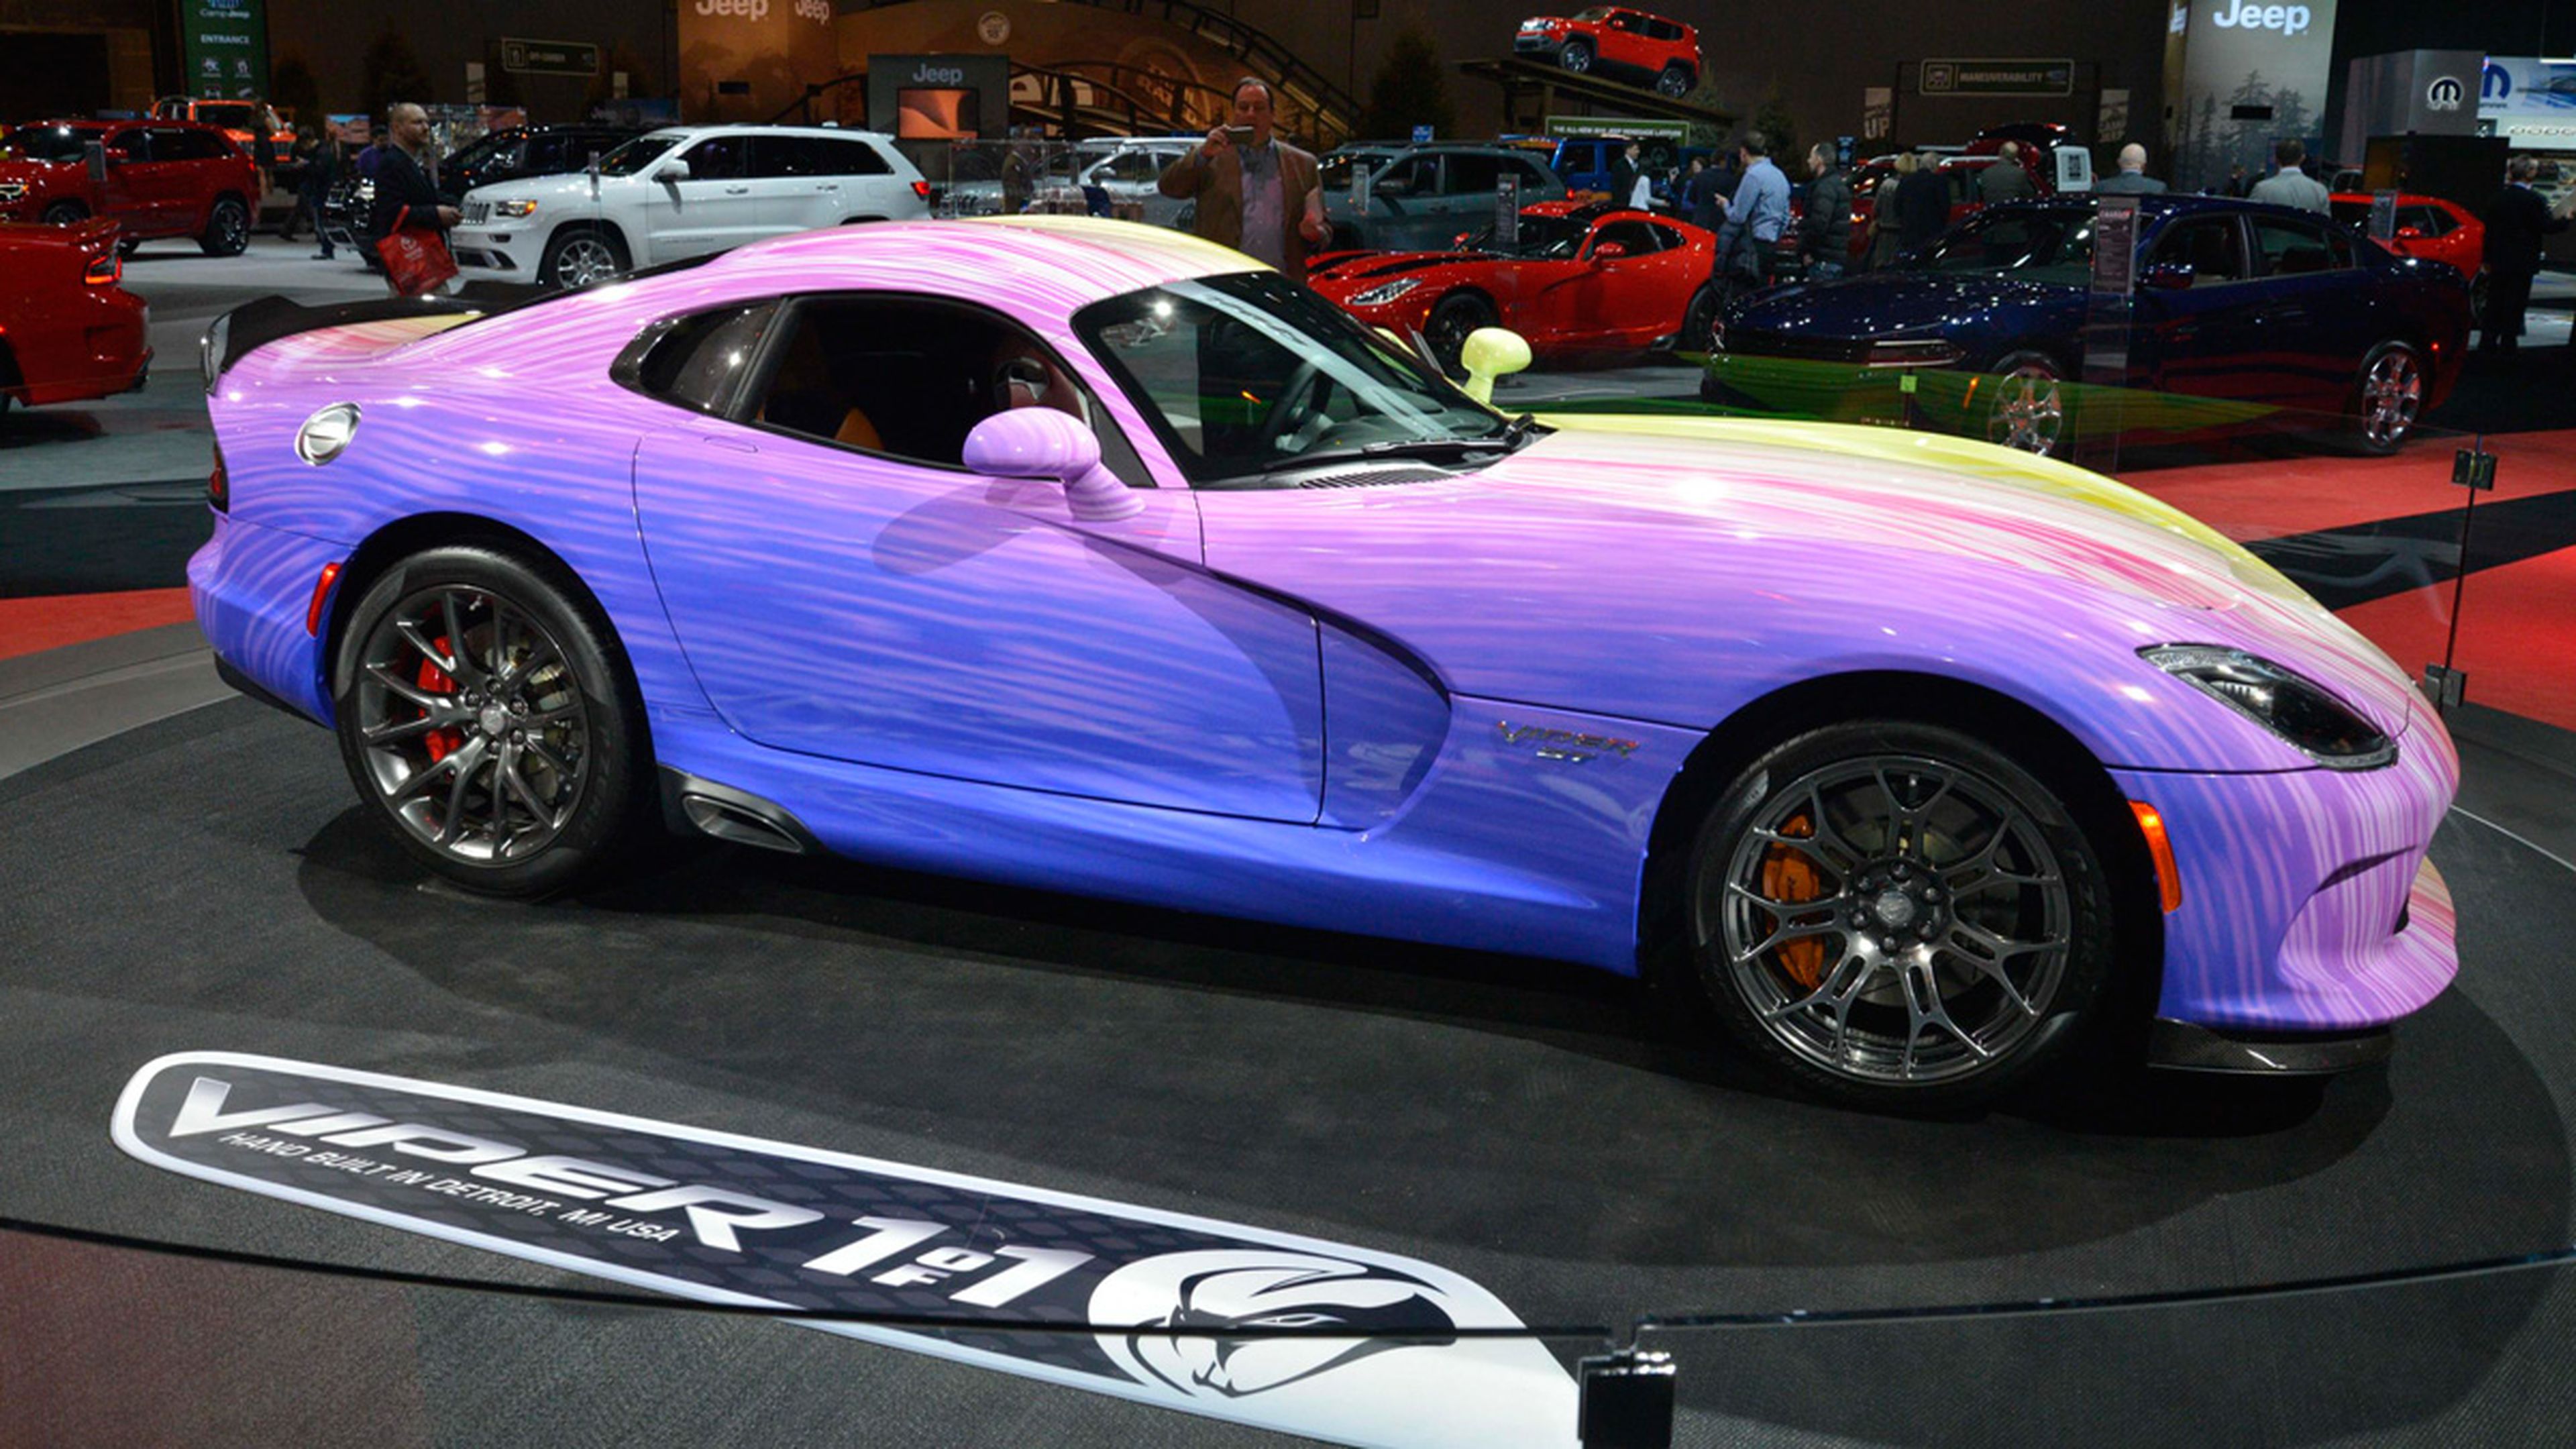 Dodge Viper GTC "1-of-1" lateral